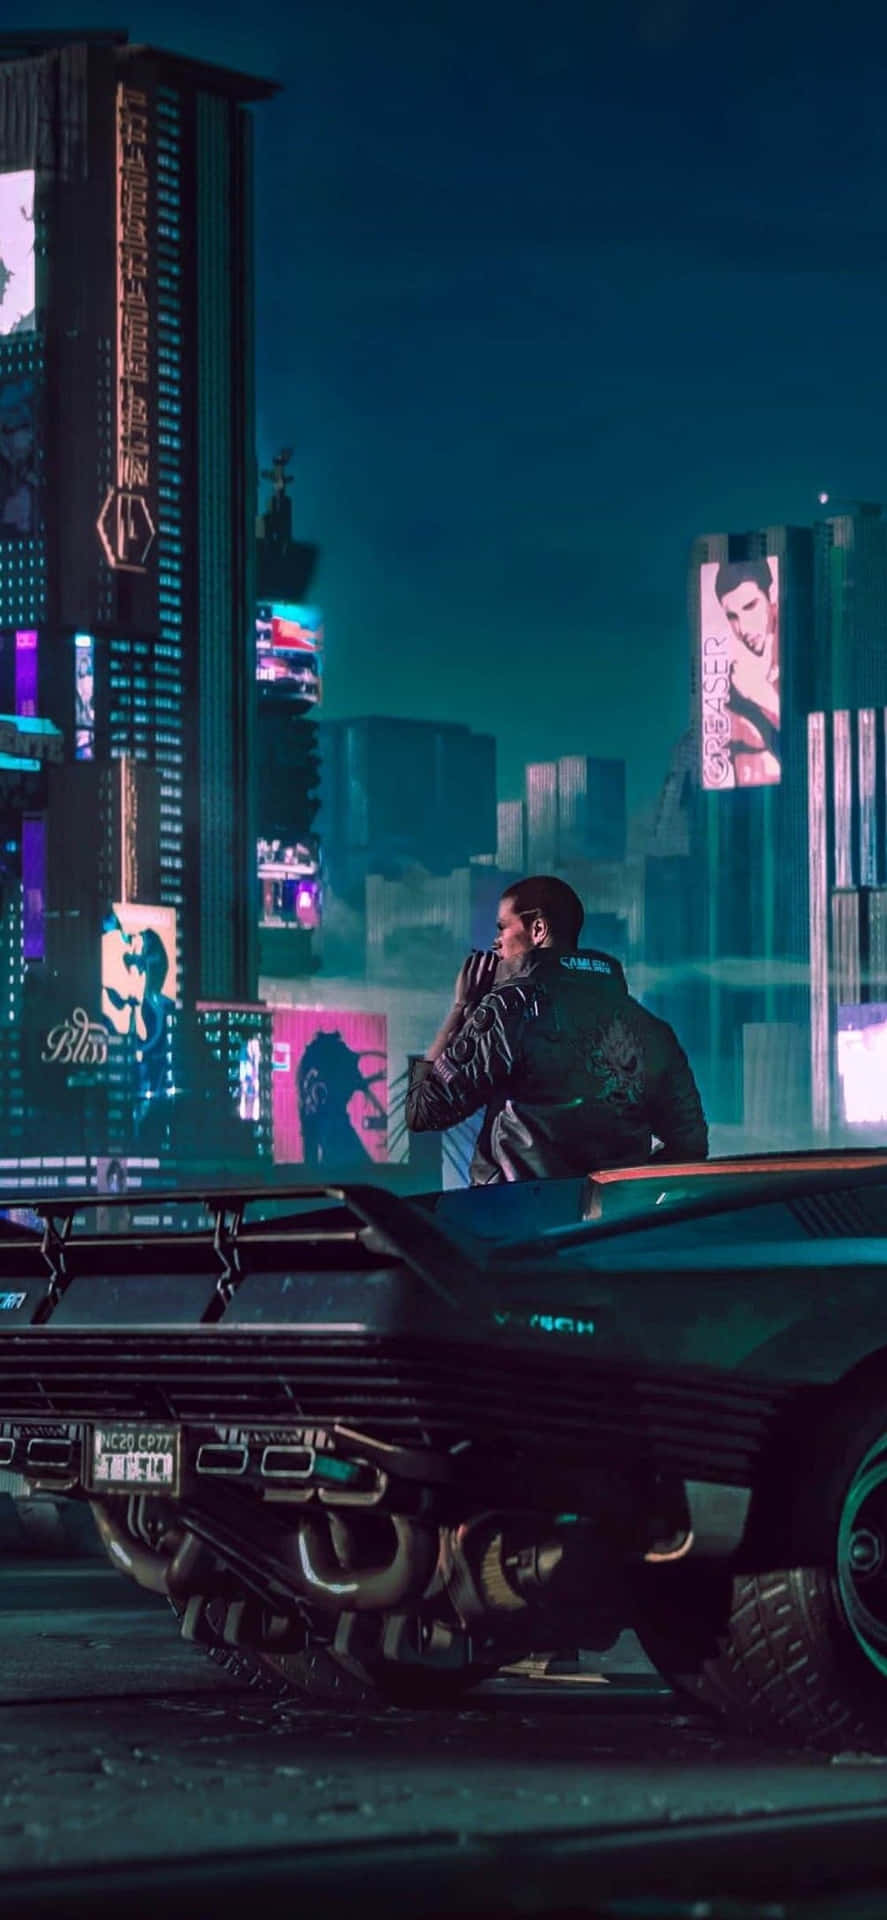 Download Enhance your cyberpunk experience with the Pixel 3XL